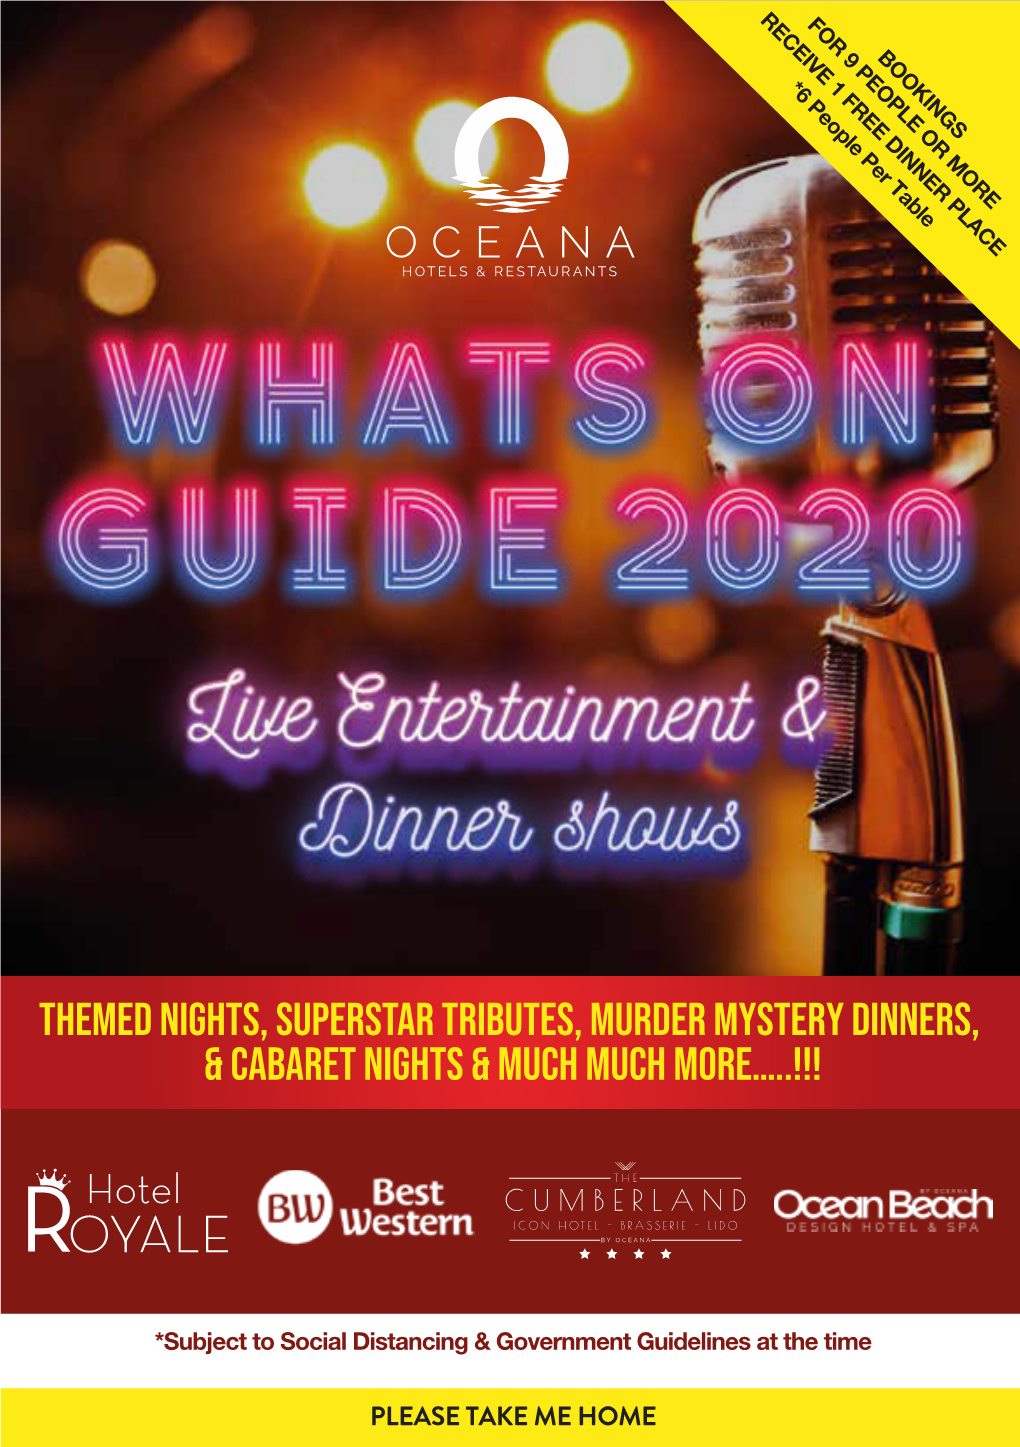 Themed Nights, Superstar Tributes, Murder Mystery Dinners, & Cabaret Nights & Much Much More…..!!!